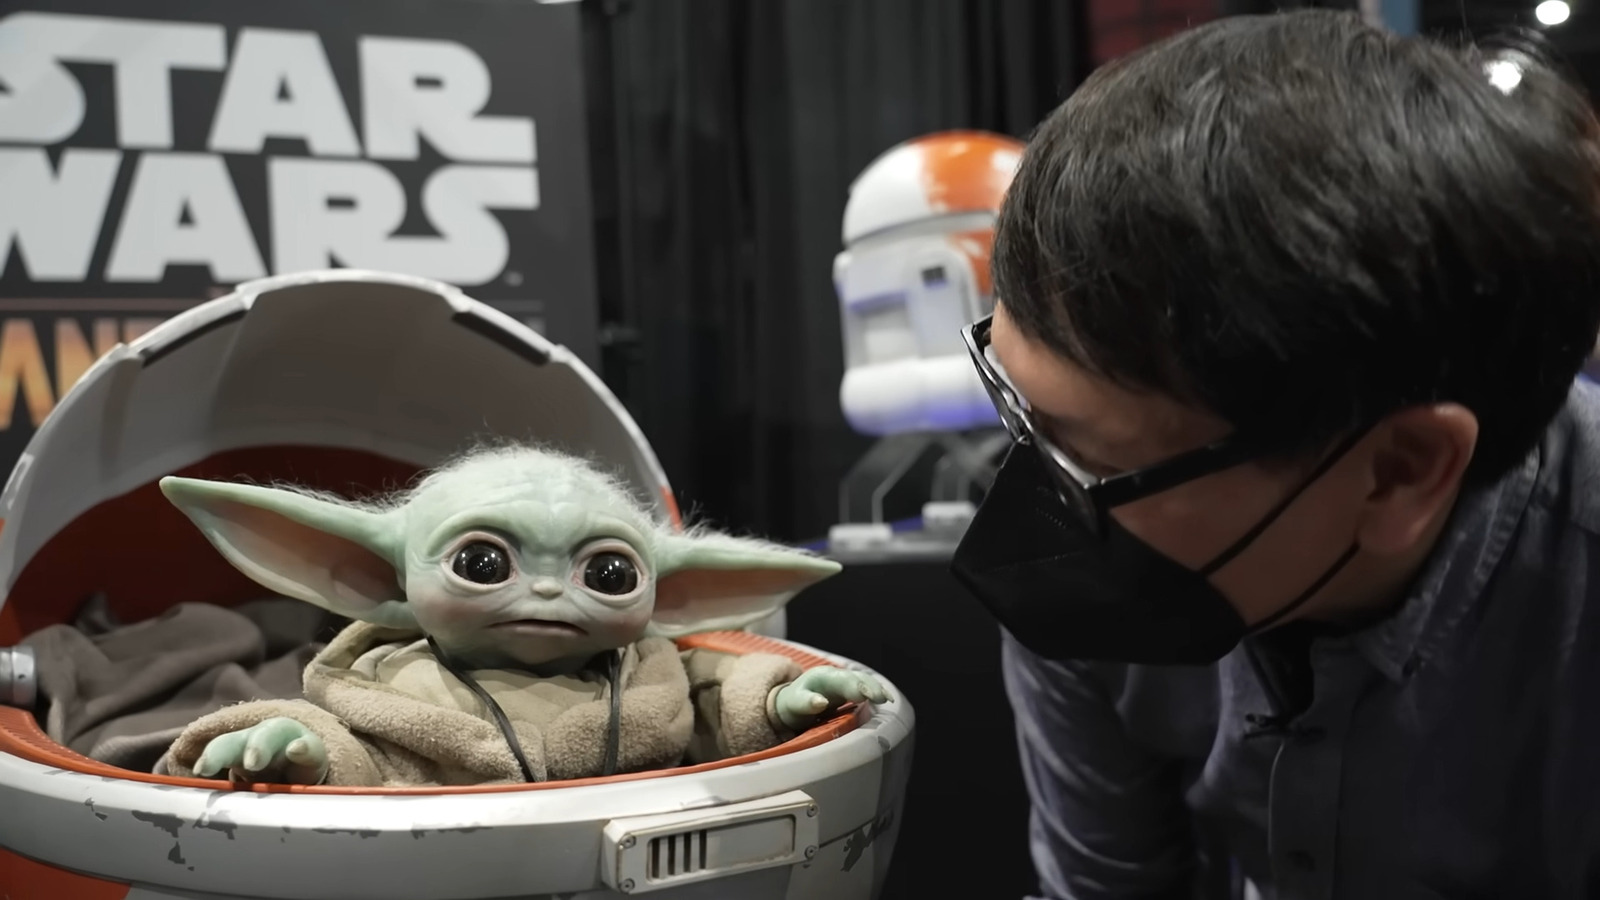 Real Baby Yoda Animatronic Puppet! THE COOLEST THING AT COMIC-CON 2022! 